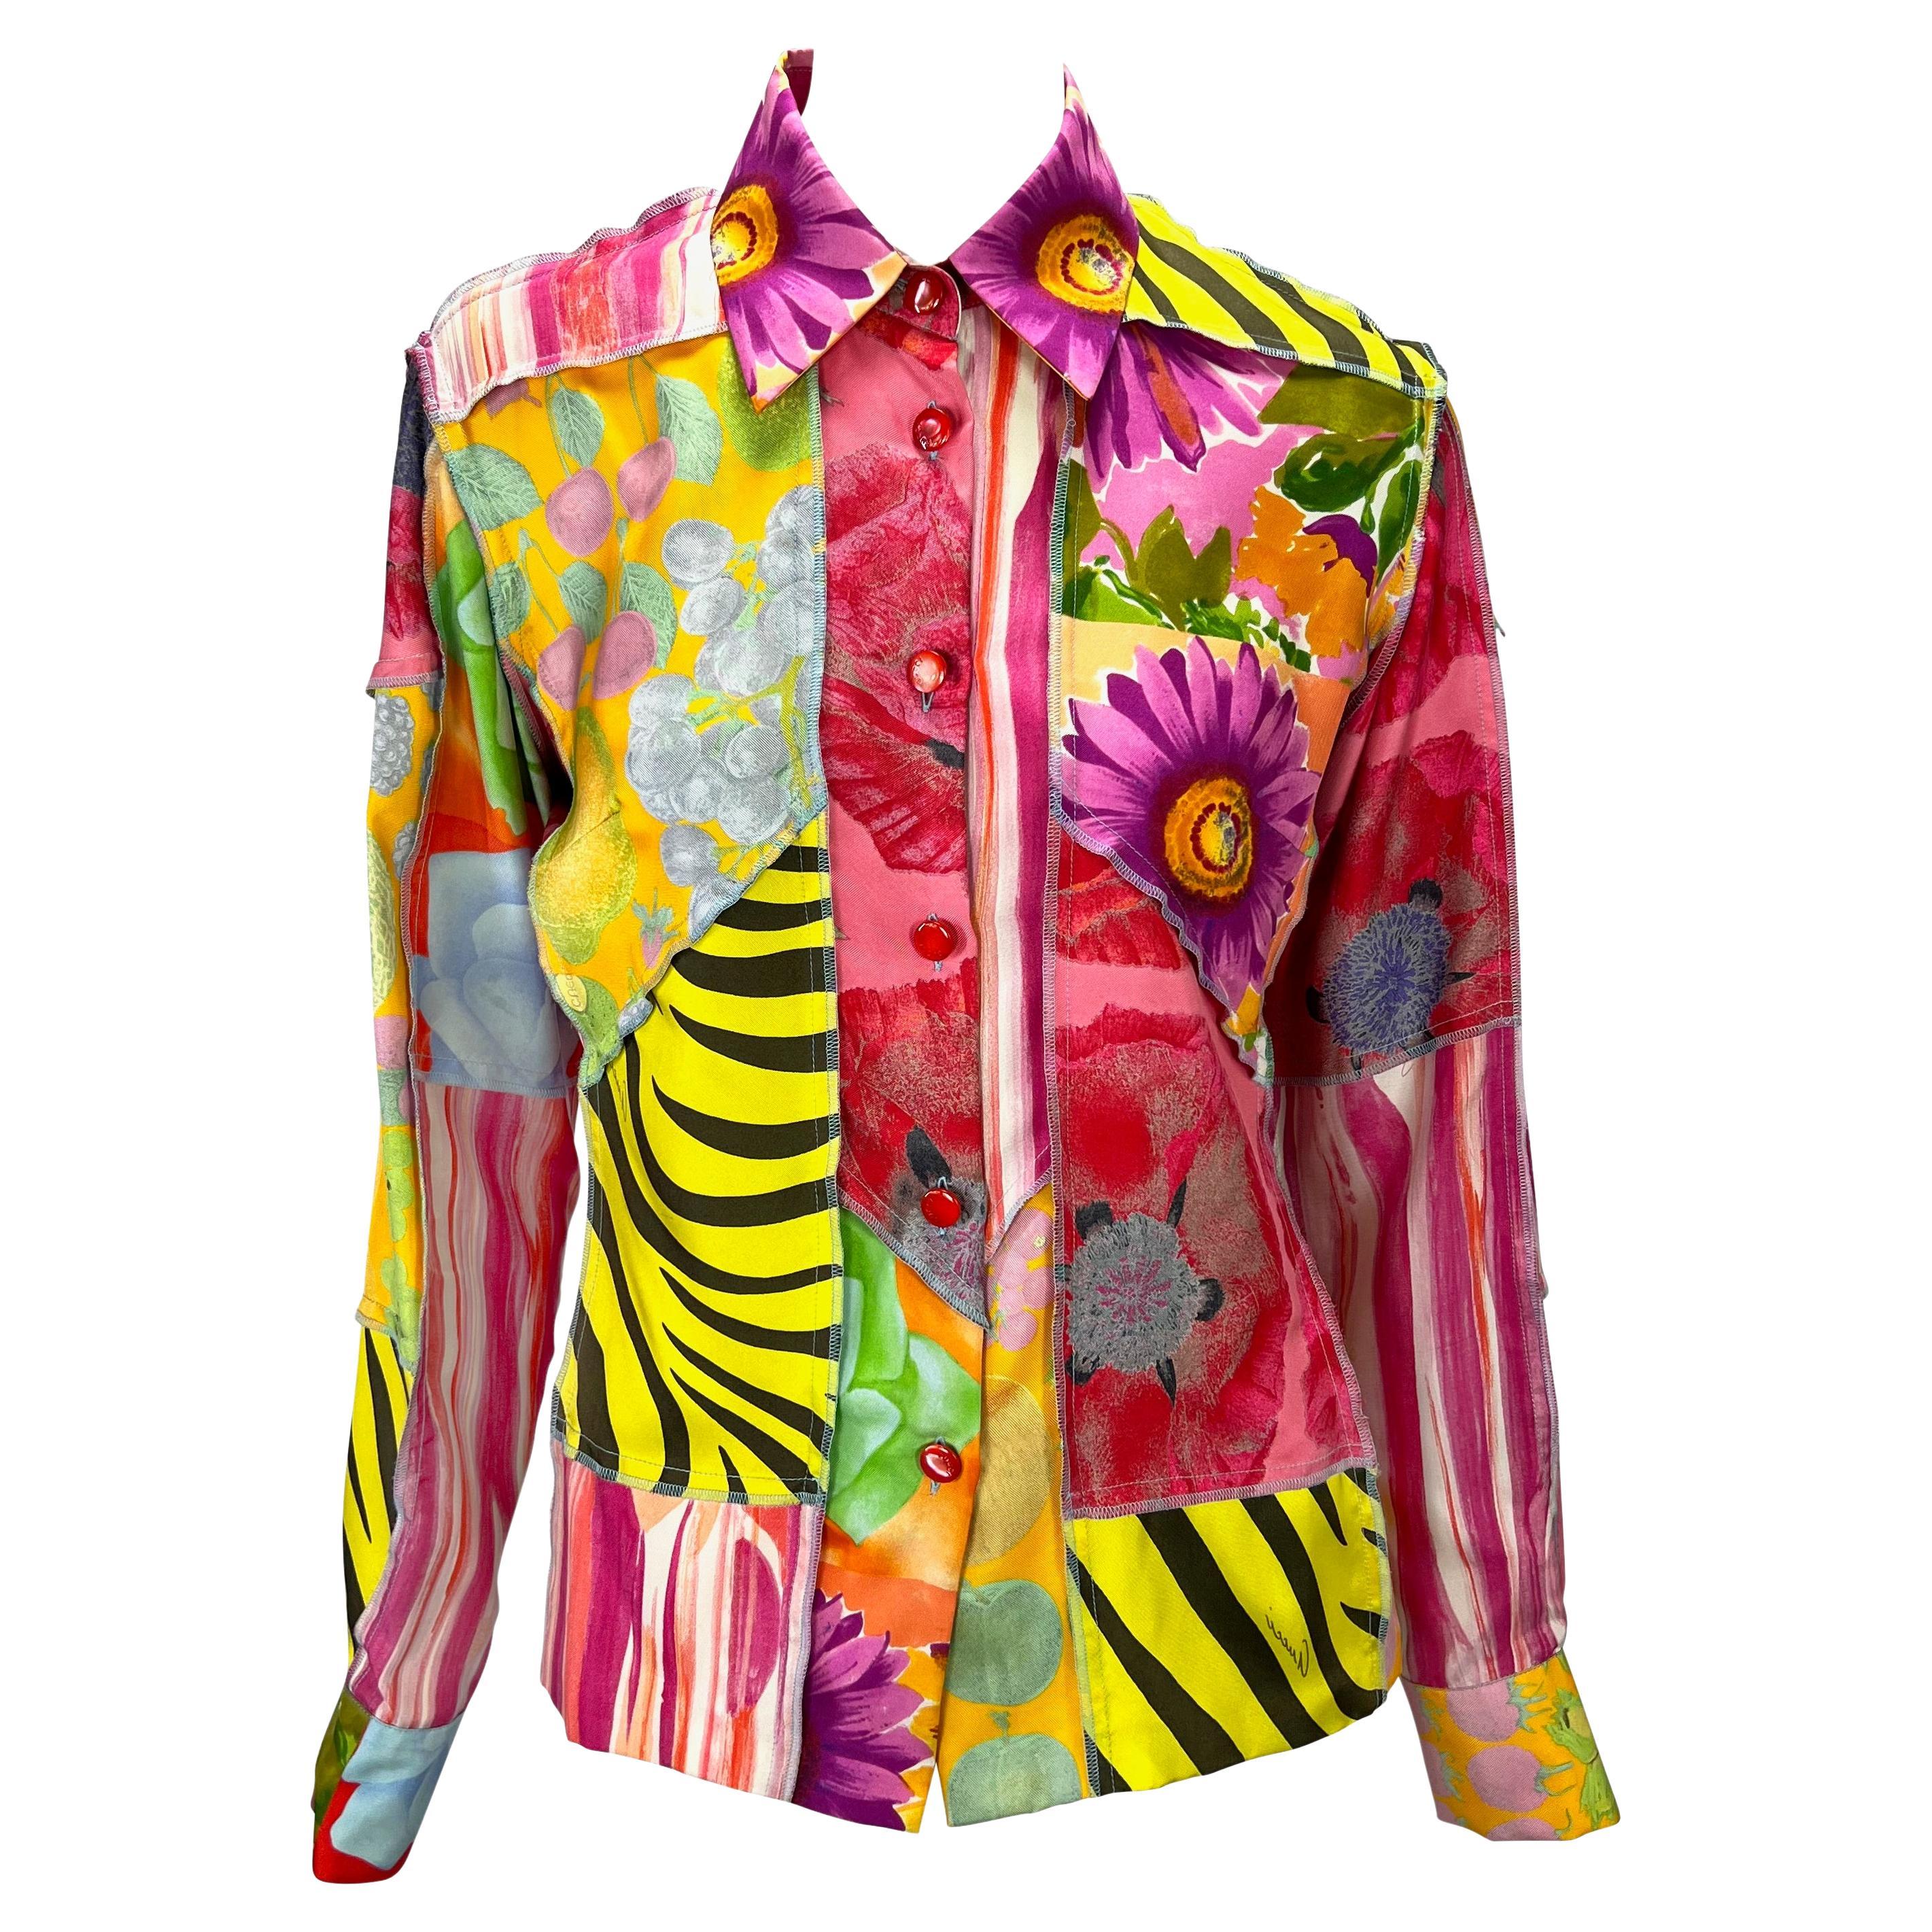 S/S 1996 Gucci by Tom Ford Silk Patchwork Inside Out Print Button Up Blouse